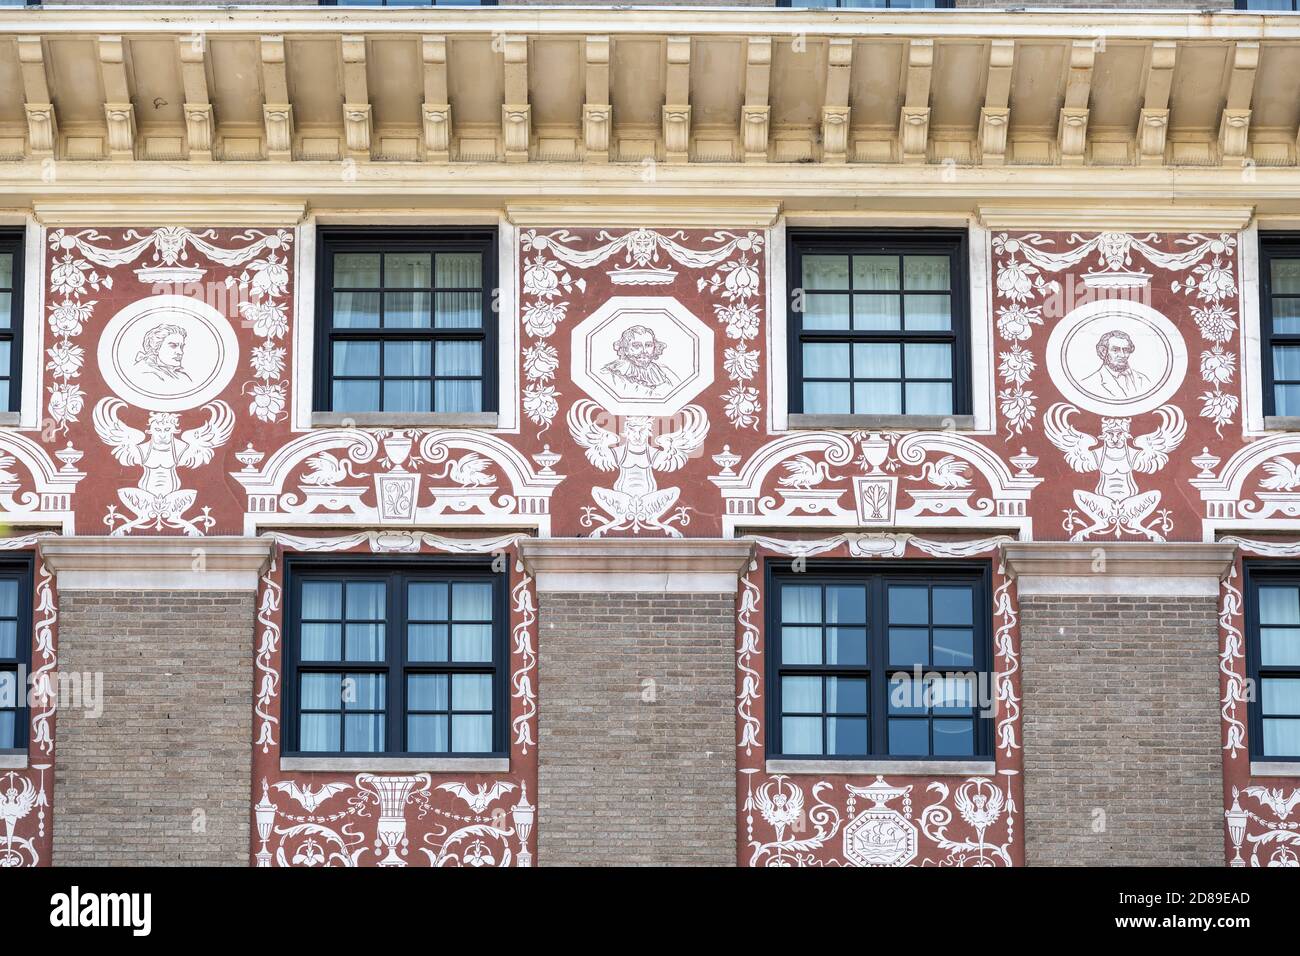 Ornate cream coloured sgraffito decoration on a reddish-brown background decorates the facade of Hotel Washington on 15th Street NW in Washington DC Stock Photo